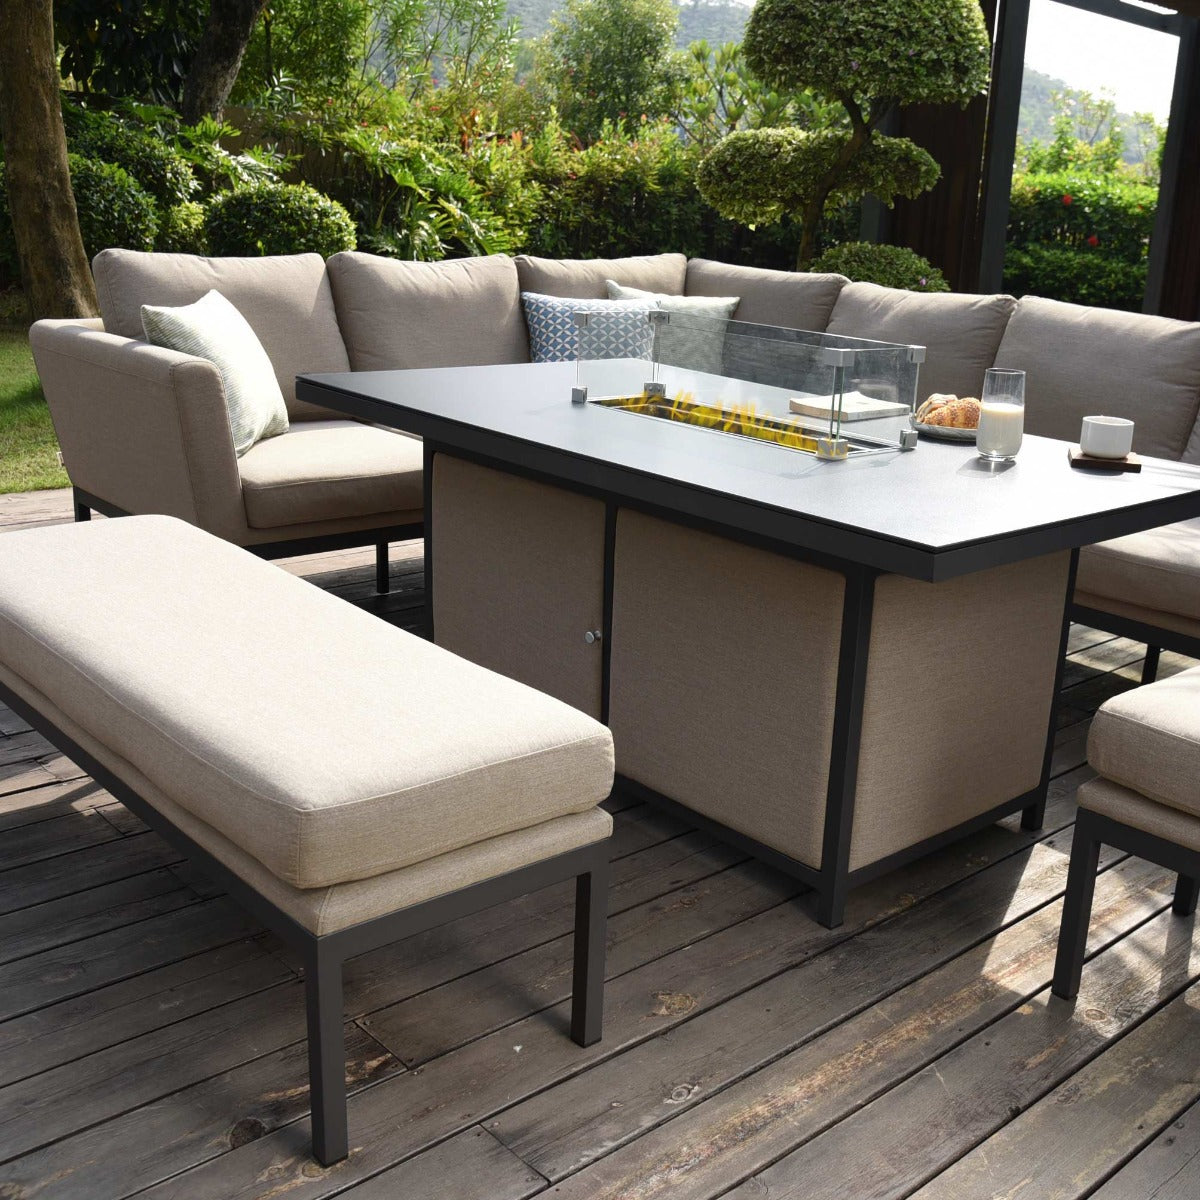 Maze - Outdoor Fabric Pulse Rectangular Corner Dining Set with Fire Pit Table - Taupe